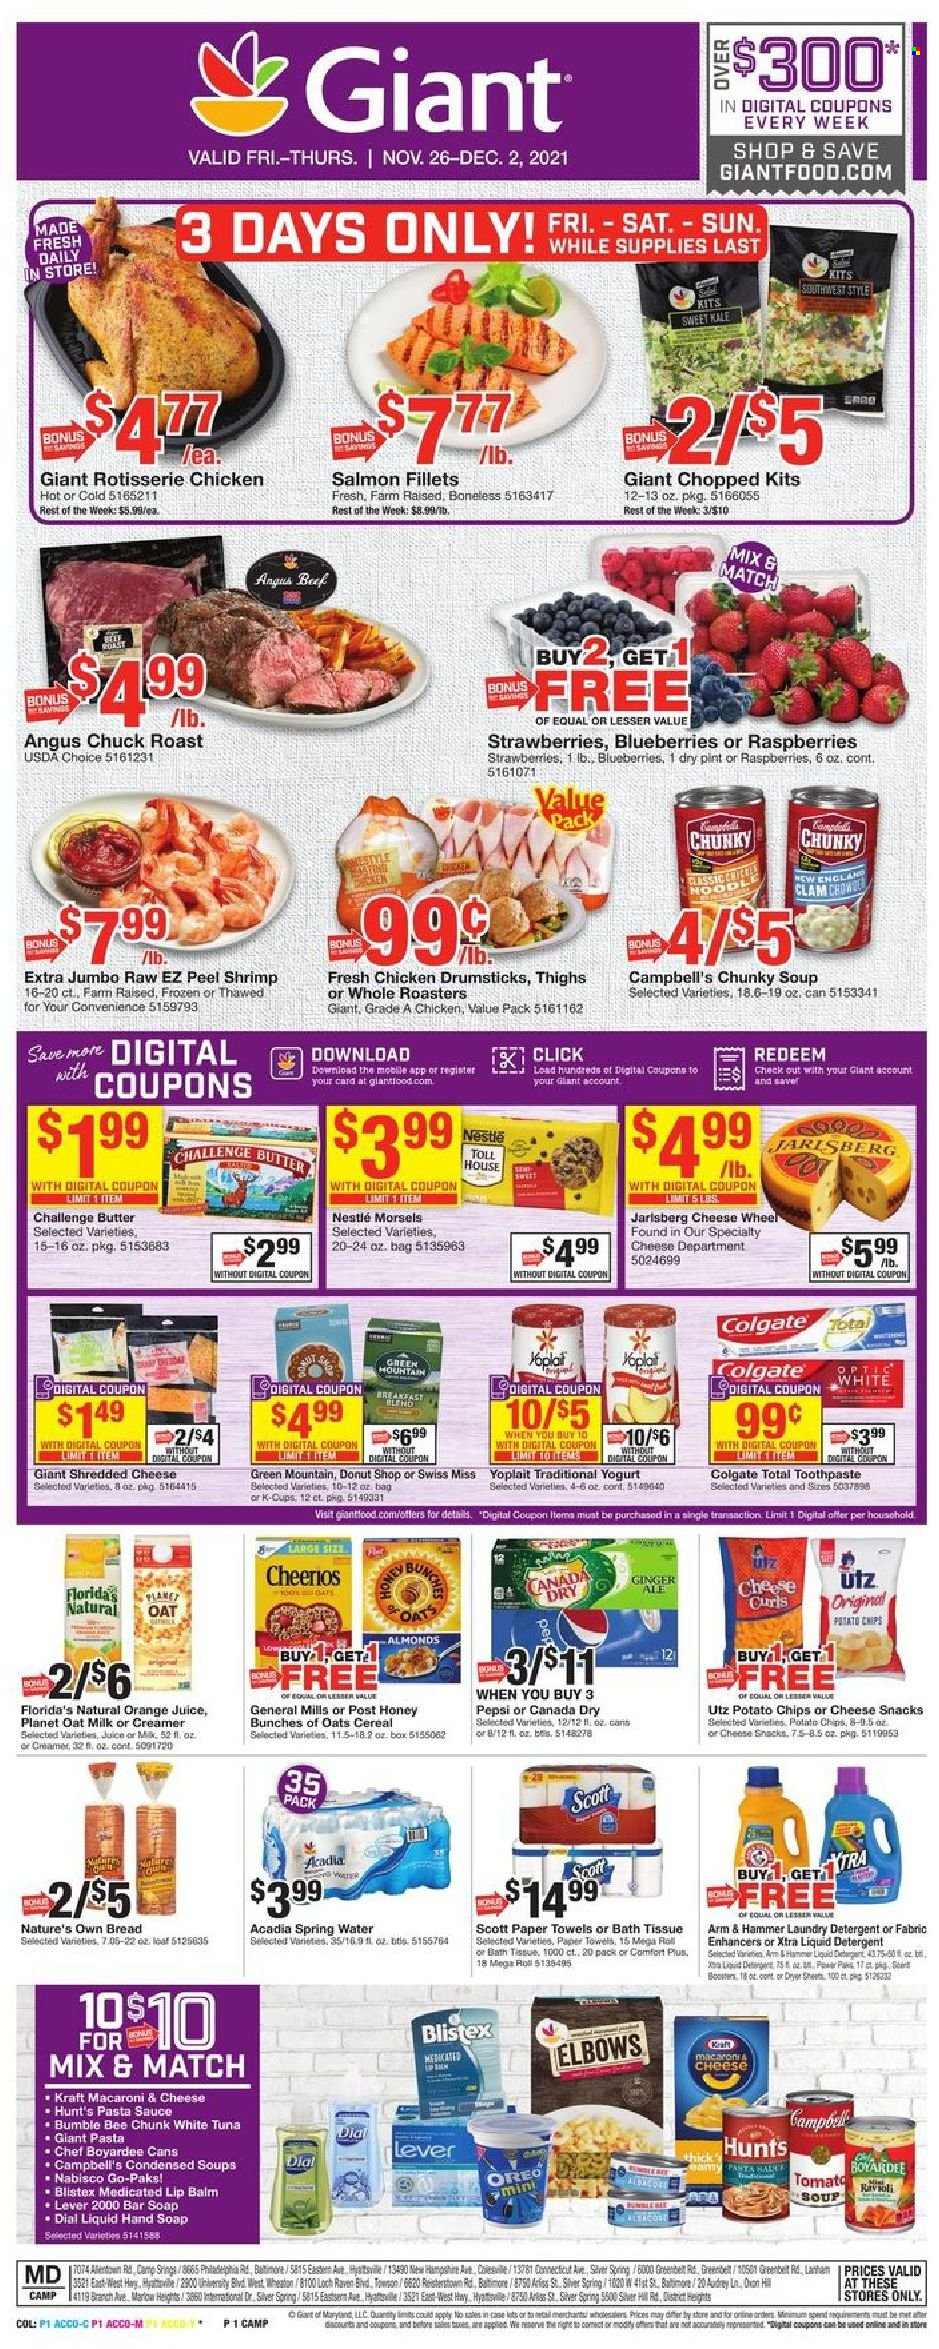 thumbnail - Giant Food Flyer - 11/26/2021 - 12/02/2021 - Sales products - bread, kale, clams, salmon, salmon fillet, tuna, shrimps, Campbell's, macaroni & cheese, tomato soup, chicken roast, pasta sauce, soup, Bumble Bee, sauce, Kraft®, shredded cheese, Oreo, yoghurt, Yoplait, Swiss Miss, milk, oat milk, butter, creamer, Nestlé, snack, Florida's Natural, potato chips, ARM & HAMMER, Chef Boyardee, cereals, Cheerios, Canada Dry, ginger ale, Pepsi, orange juice, juice, spring water, Acadia, coffee capsules, K-Cups, Green Mountain, chicken drumsticks, beef meat, chuck roast, bath tissue, Scott, kitchen towels, paper towels, detergent, liquid detergent, laundry detergent, XTRA, hand soap, soap bar, Dial, soap, Colgate, toothpaste, Nature's Own. Page 1.